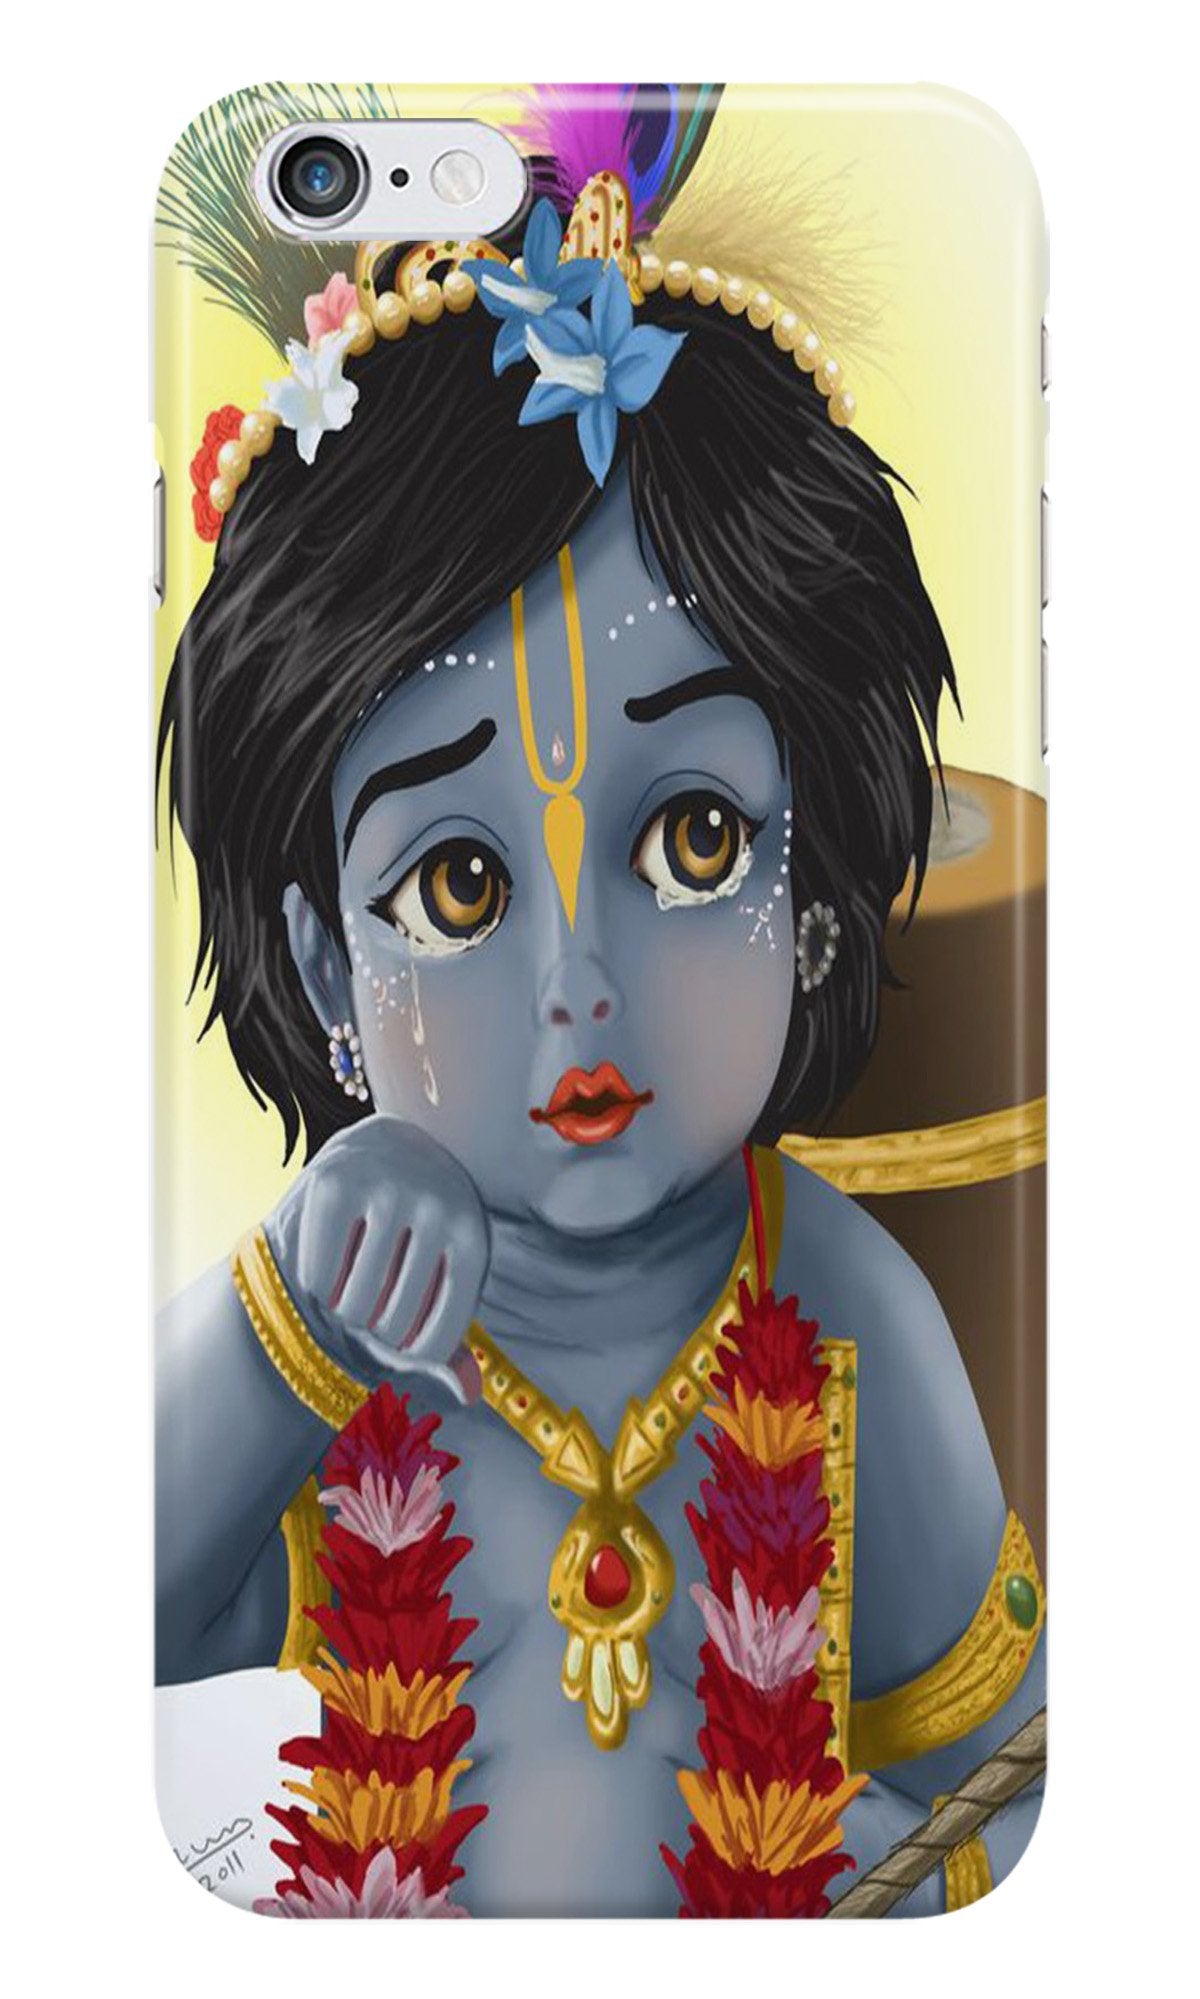 Bal Gopal Case for iPhone 6 Plus/ 6s Plus